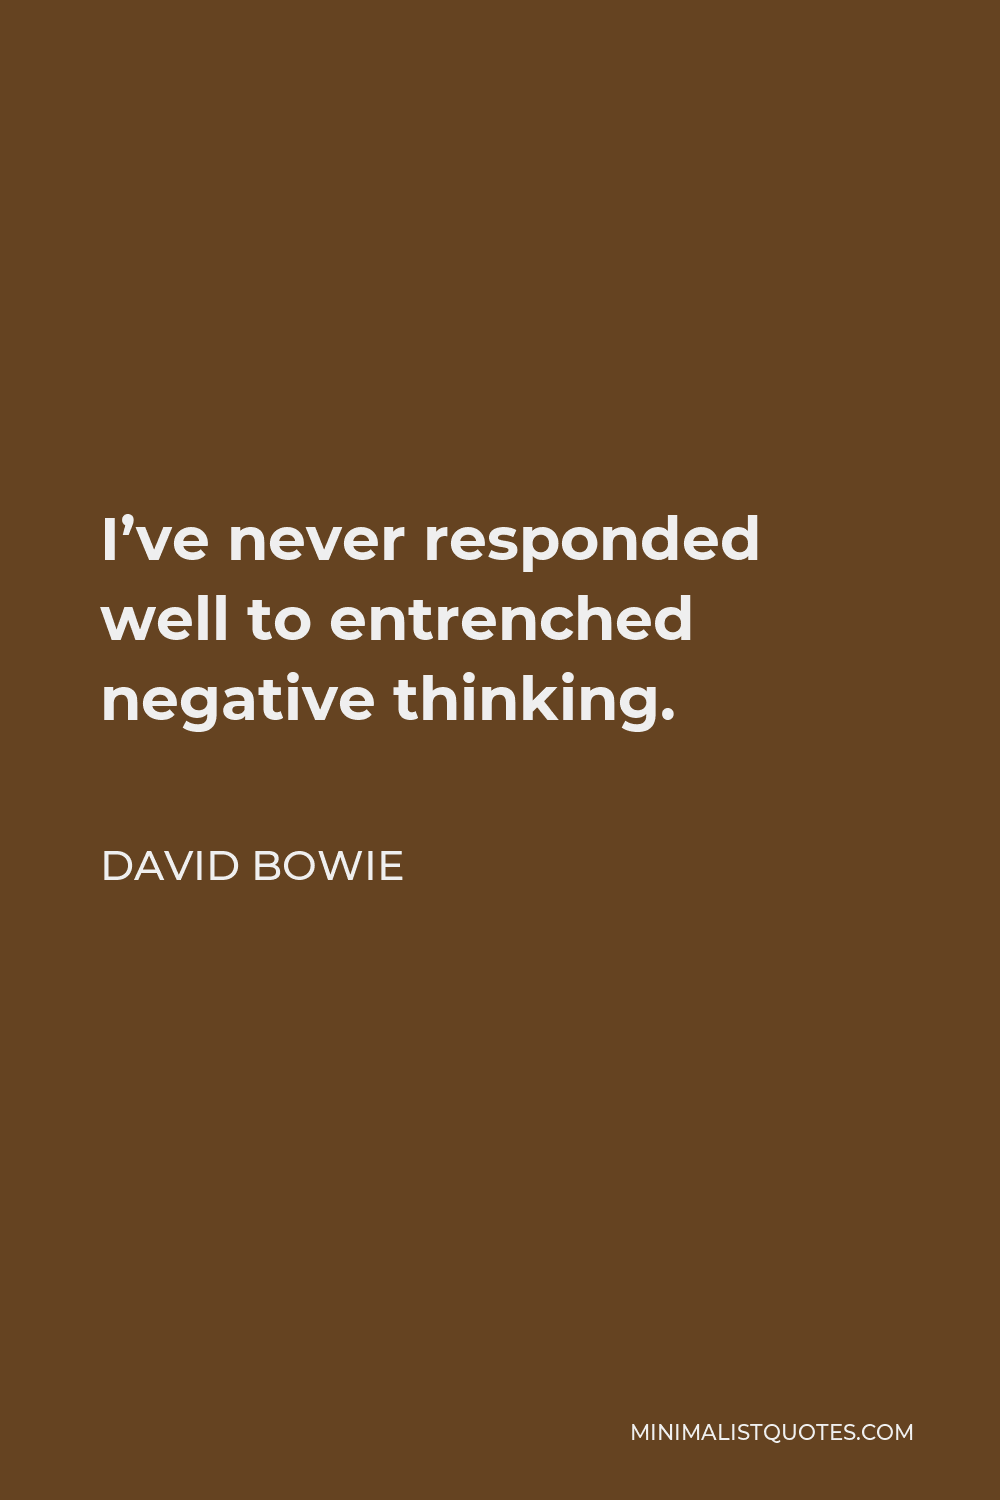 David Bowie Quote - I’ve never responded well to entrenched negative thinking.